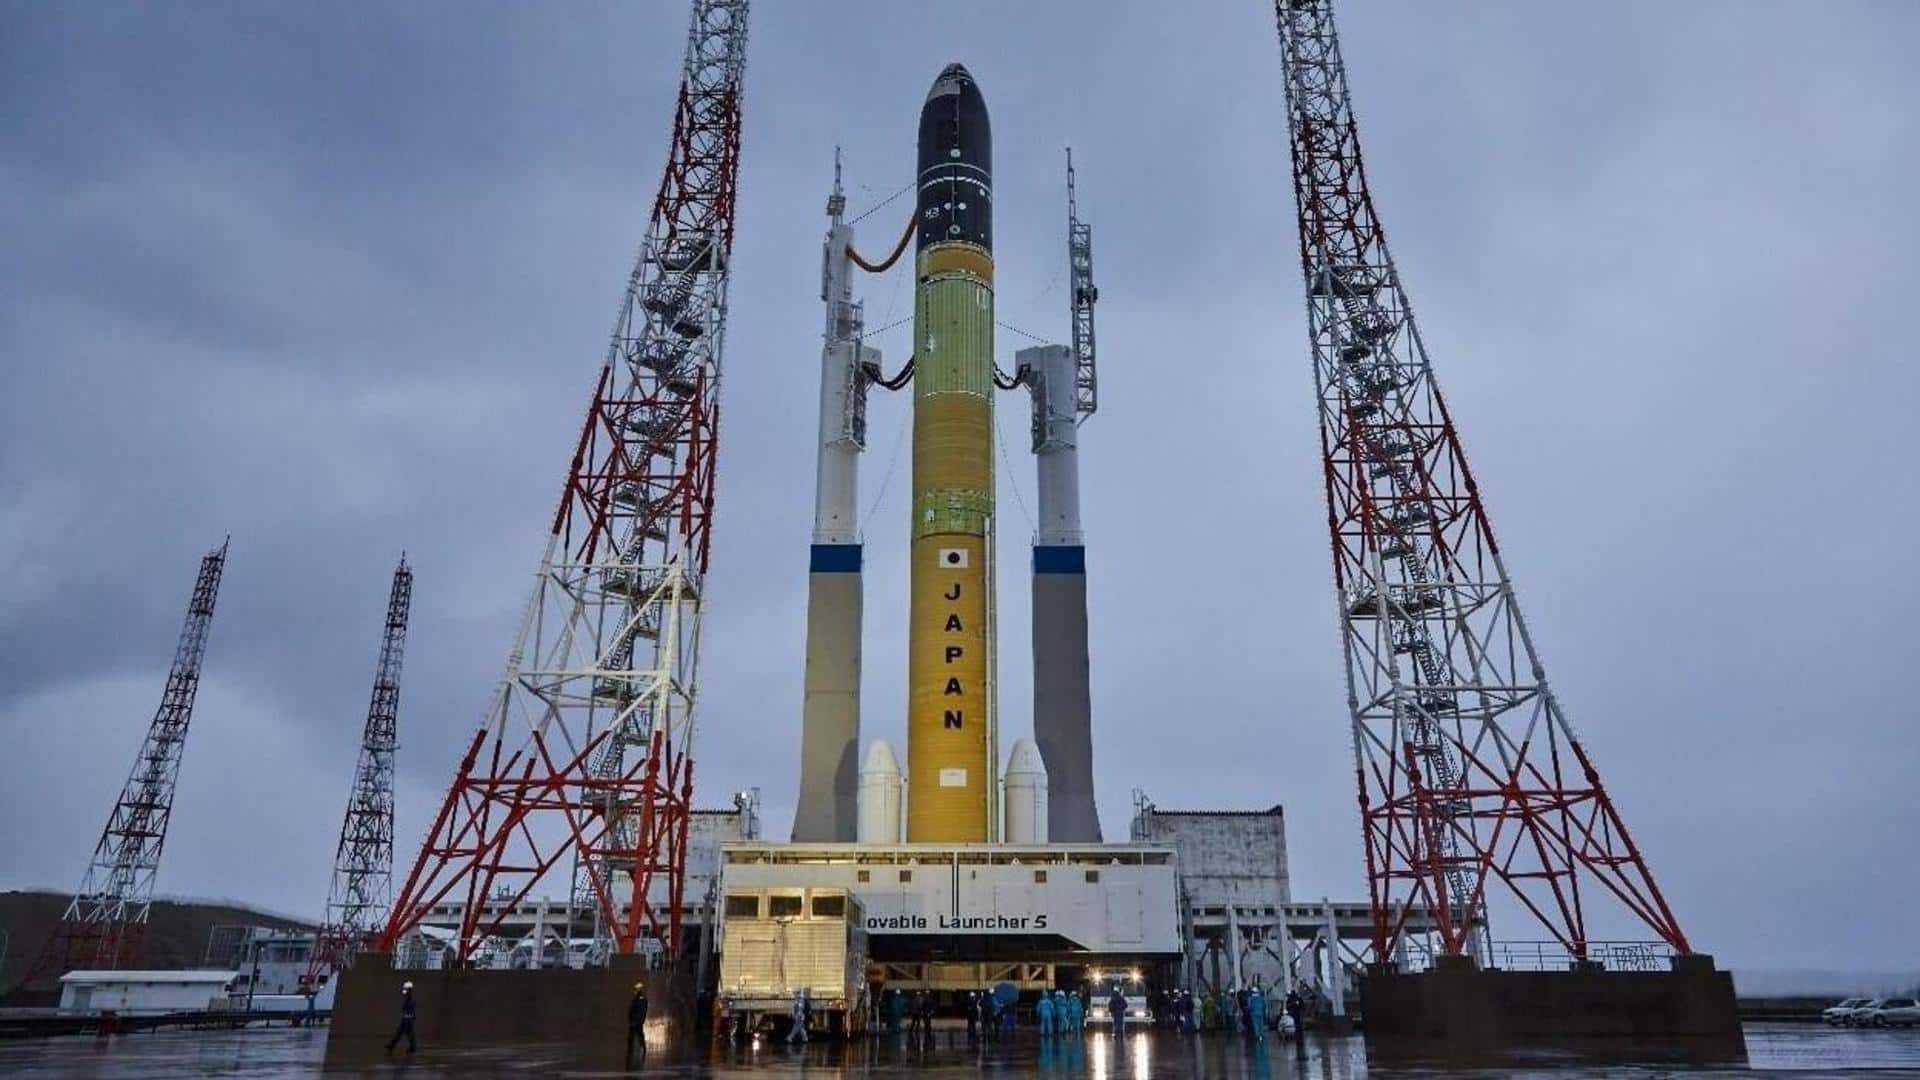 Japan's H3 rocket fails to lift off: Here's what happened